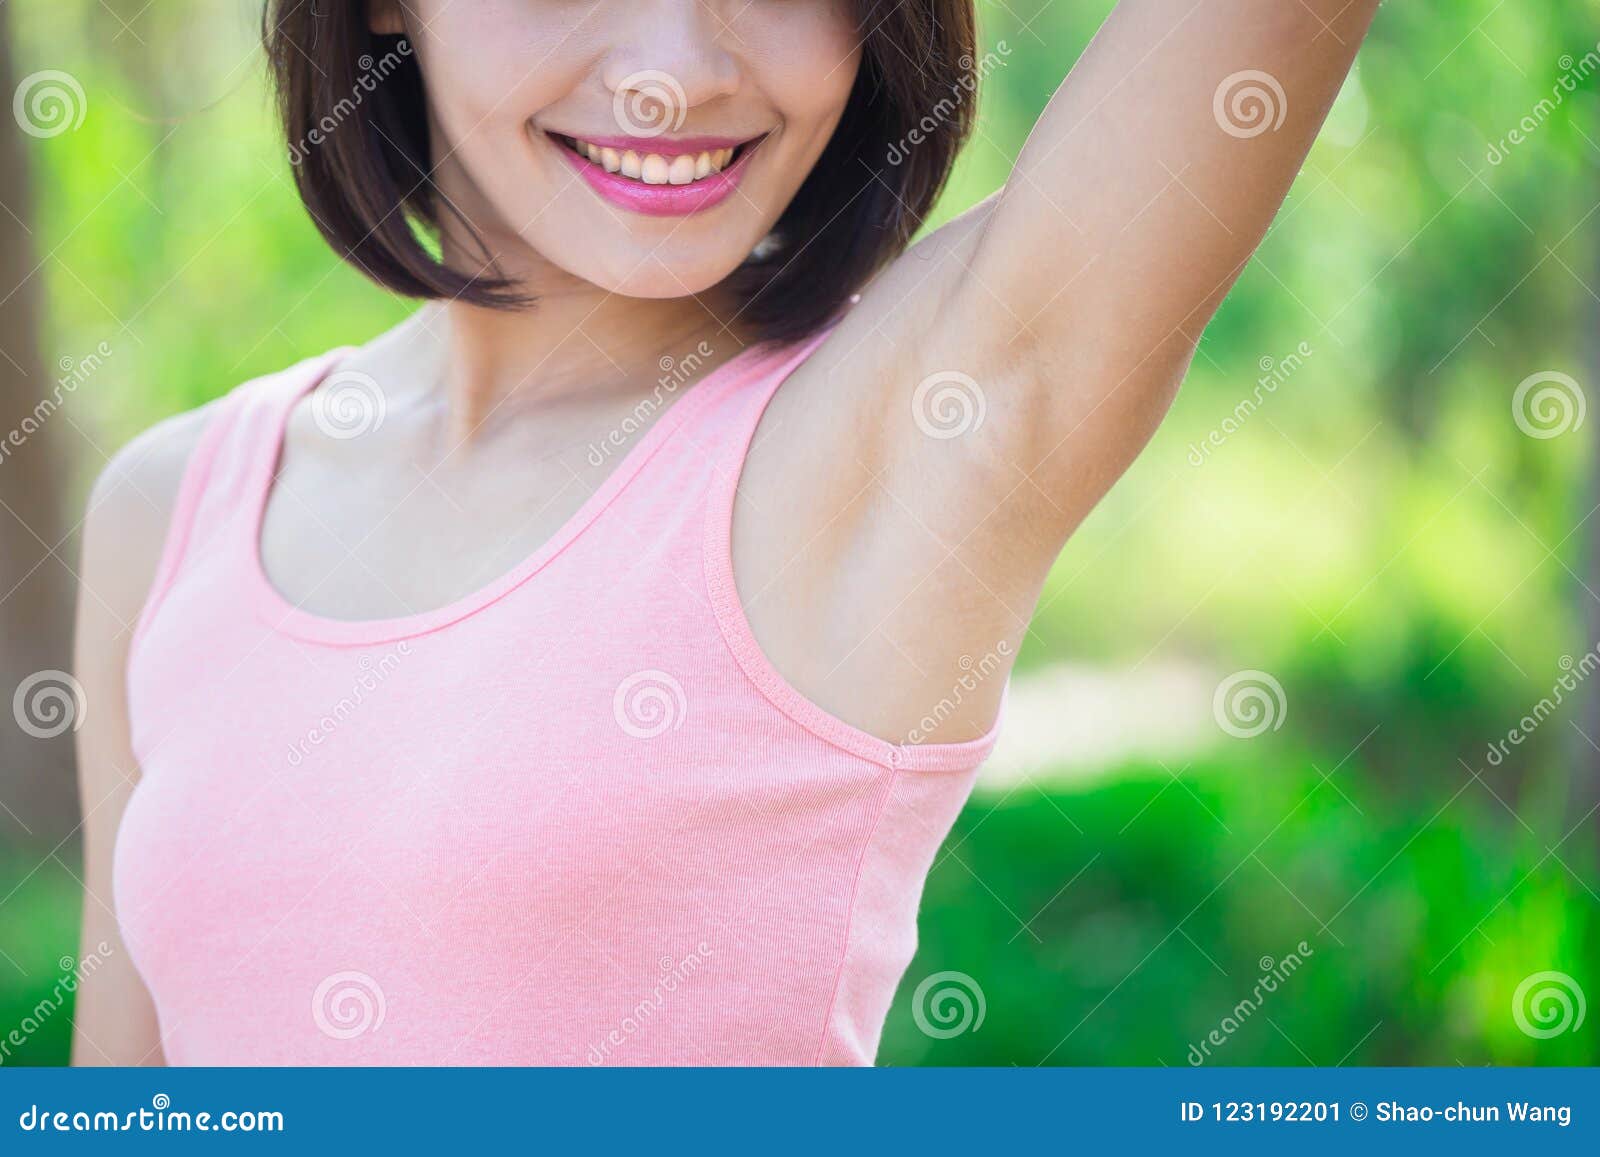 woman with underarm hair removal